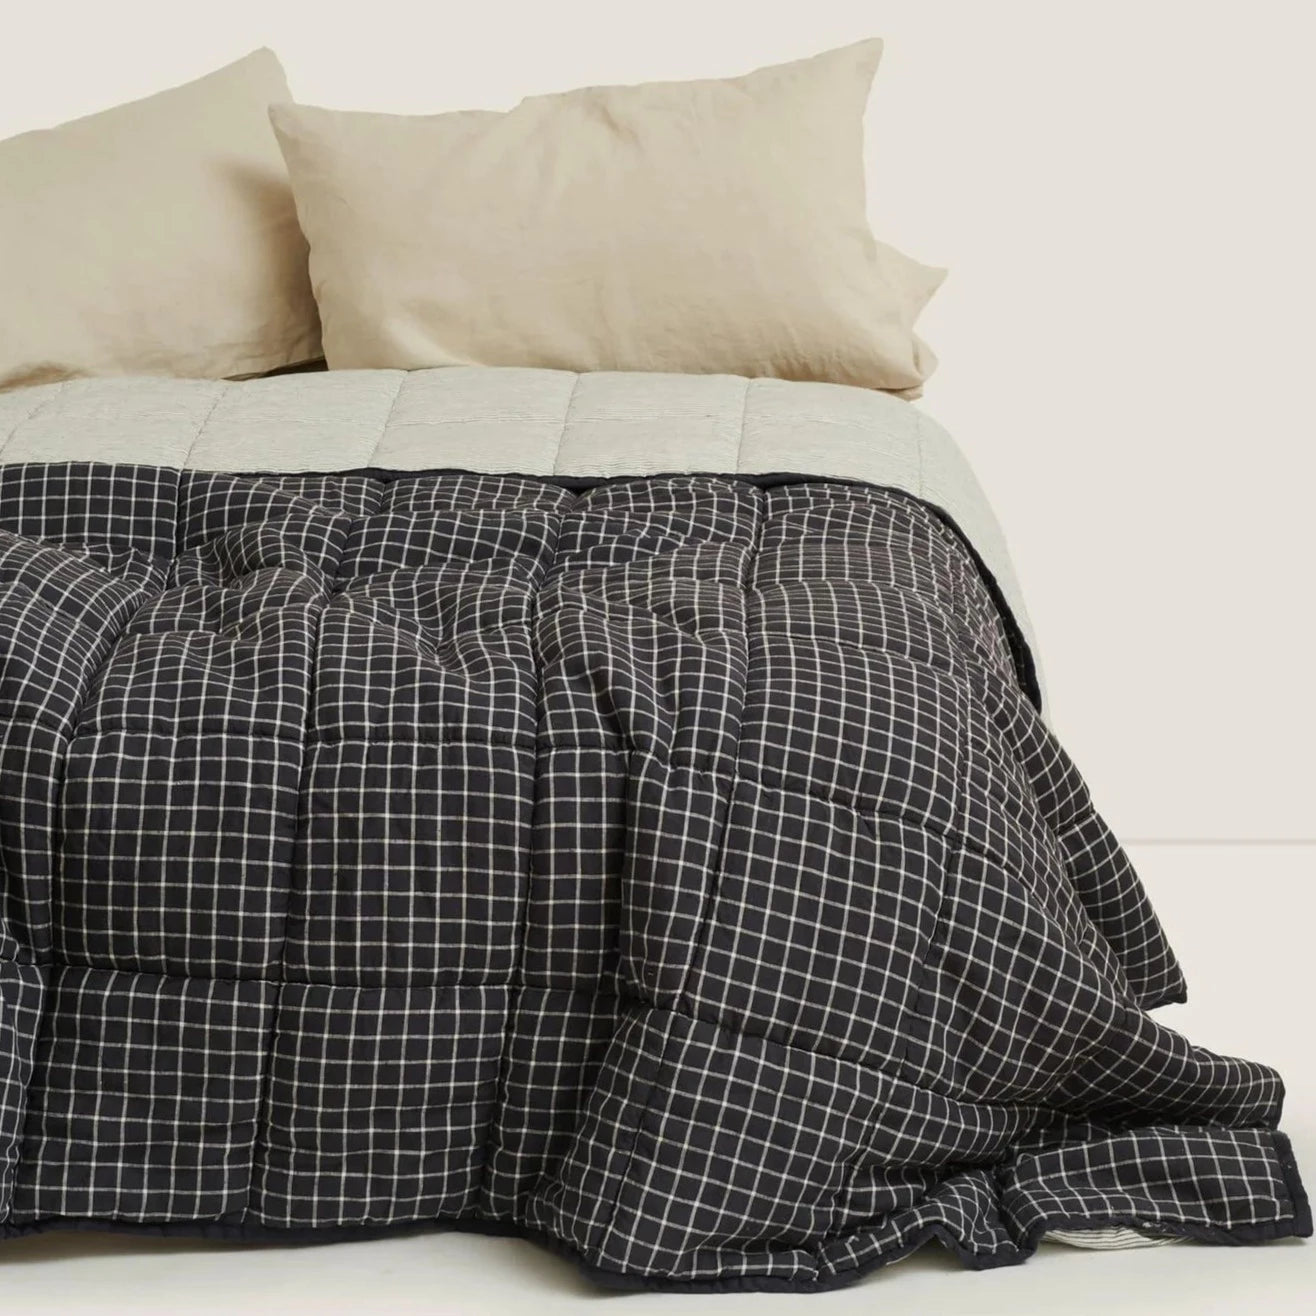 NEW GOTS French Linen Quilted Comforter